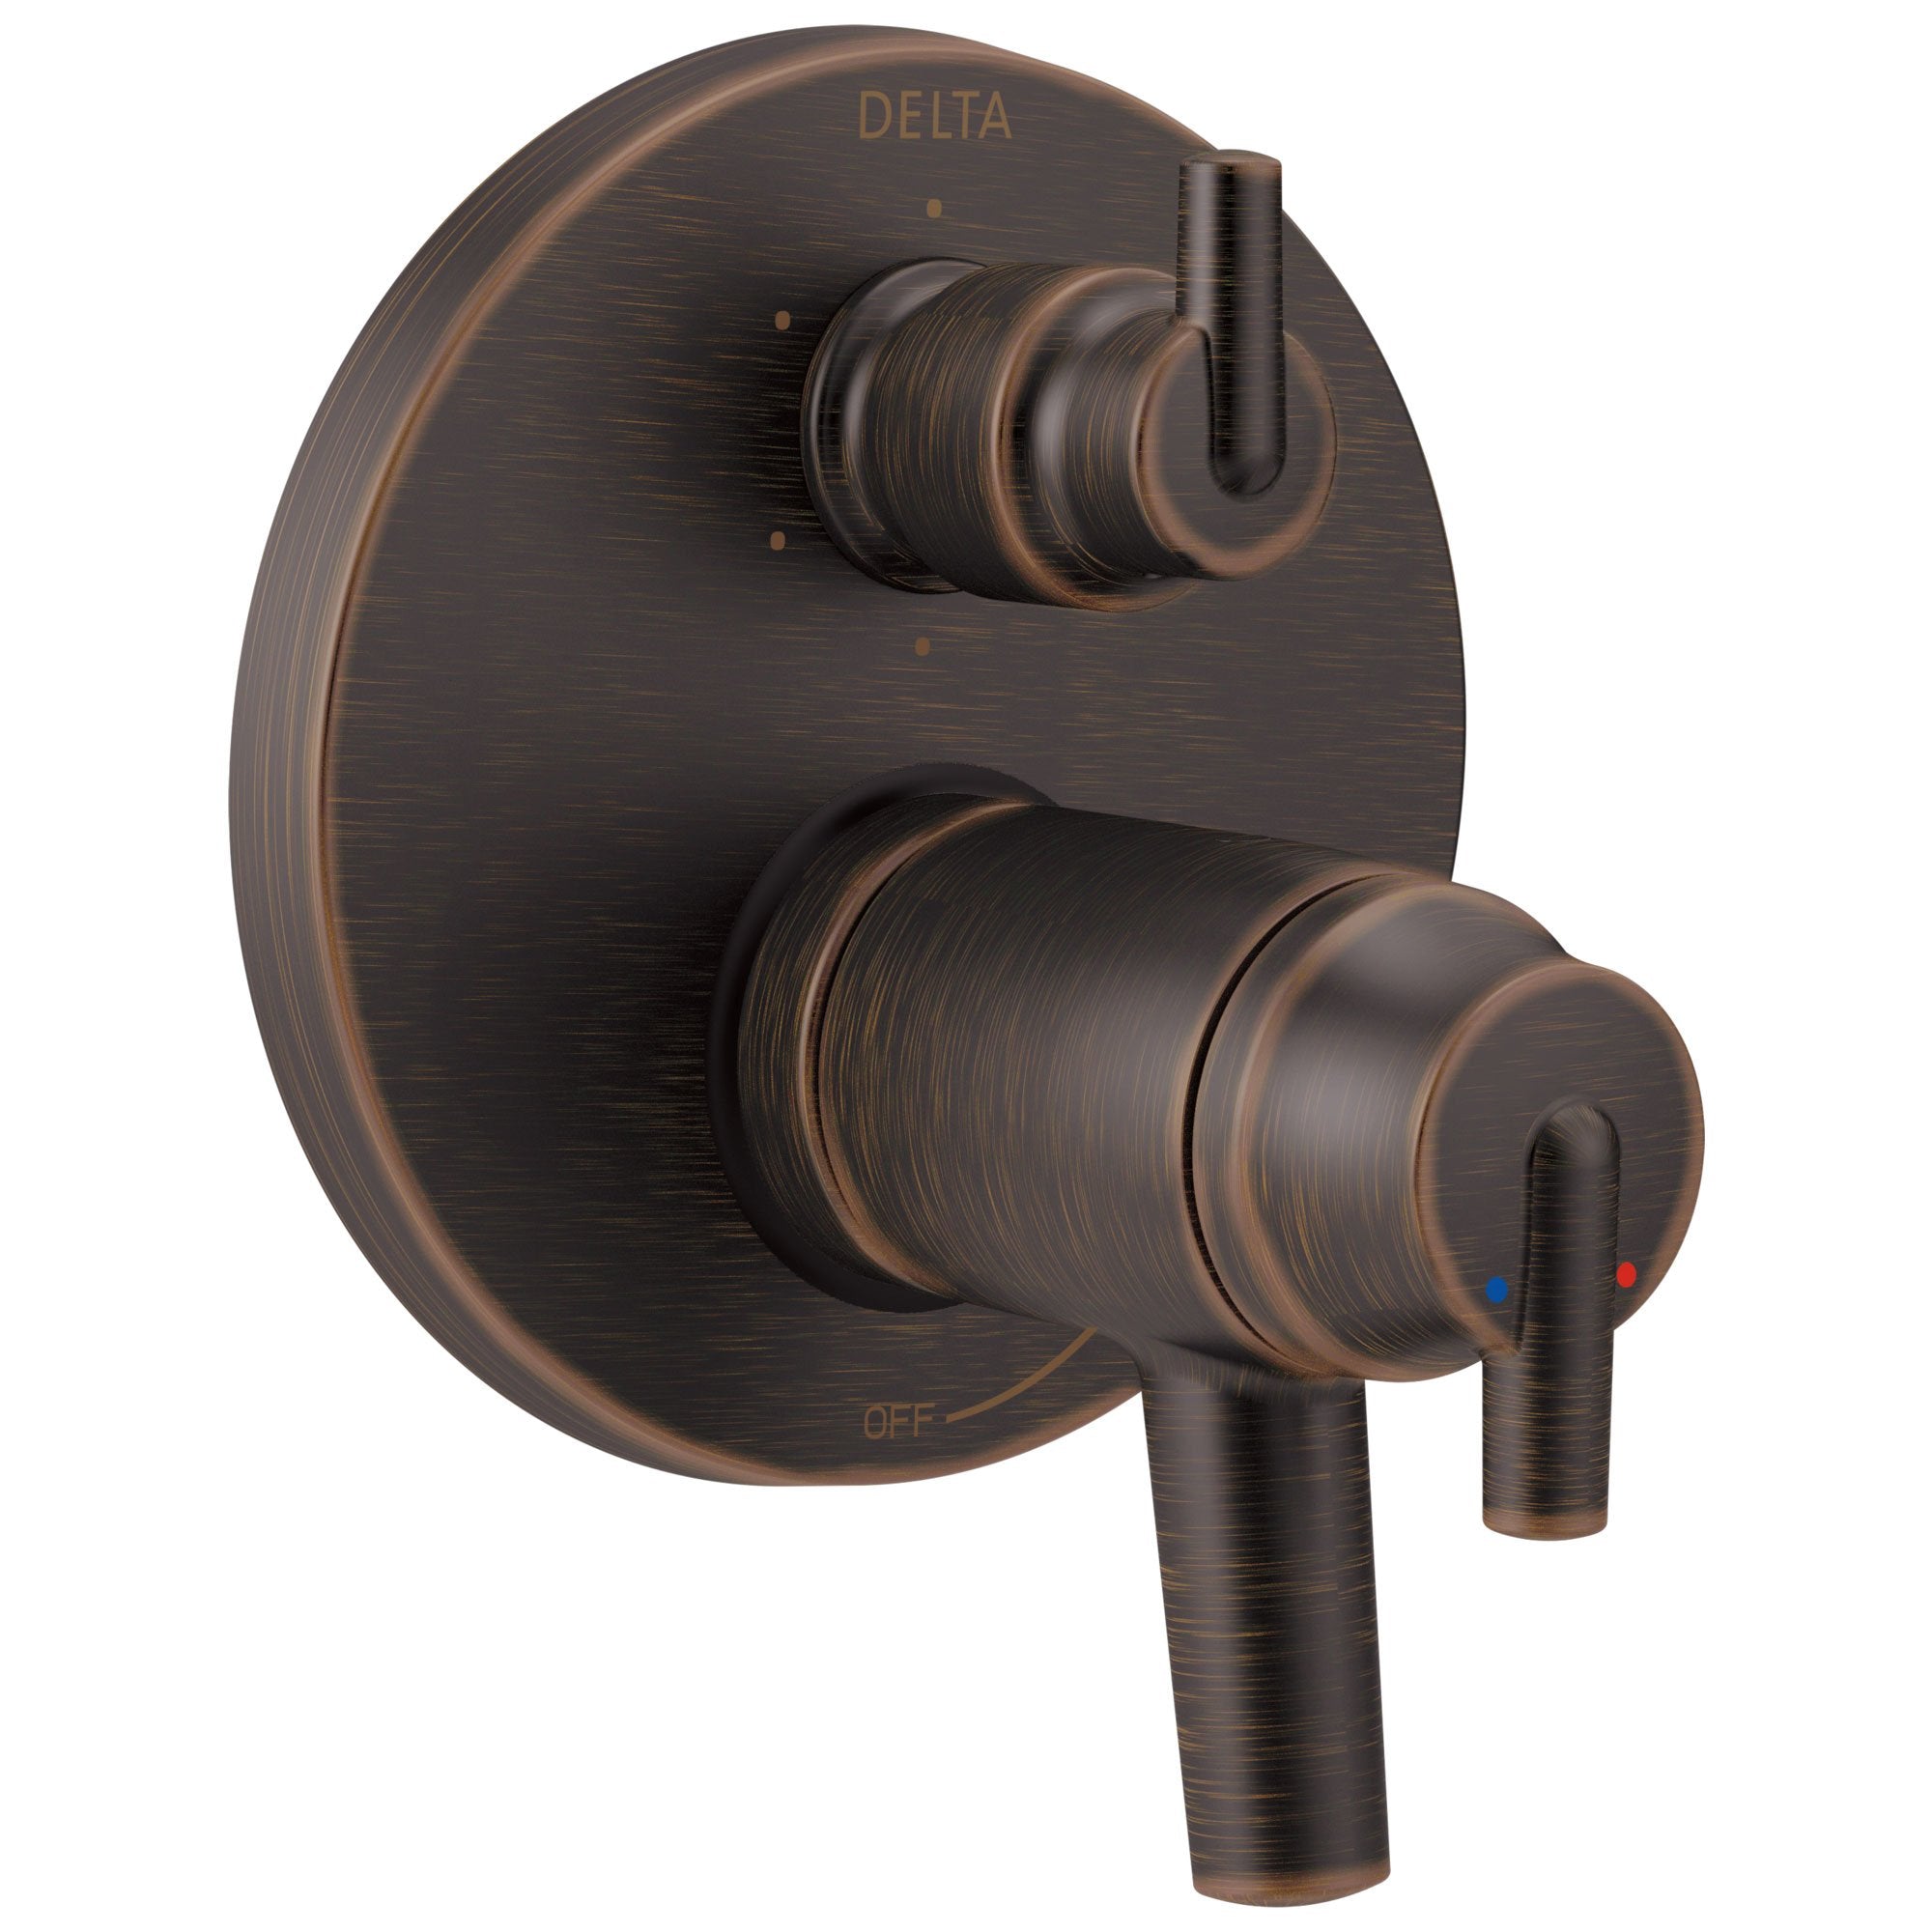 Delta Trinsic Venetian Bronze Thermostatic Shower Faucet Control Handle with 6-Setting Integrated Diverter Includes Trim Kit and Valve with Stops D2121V